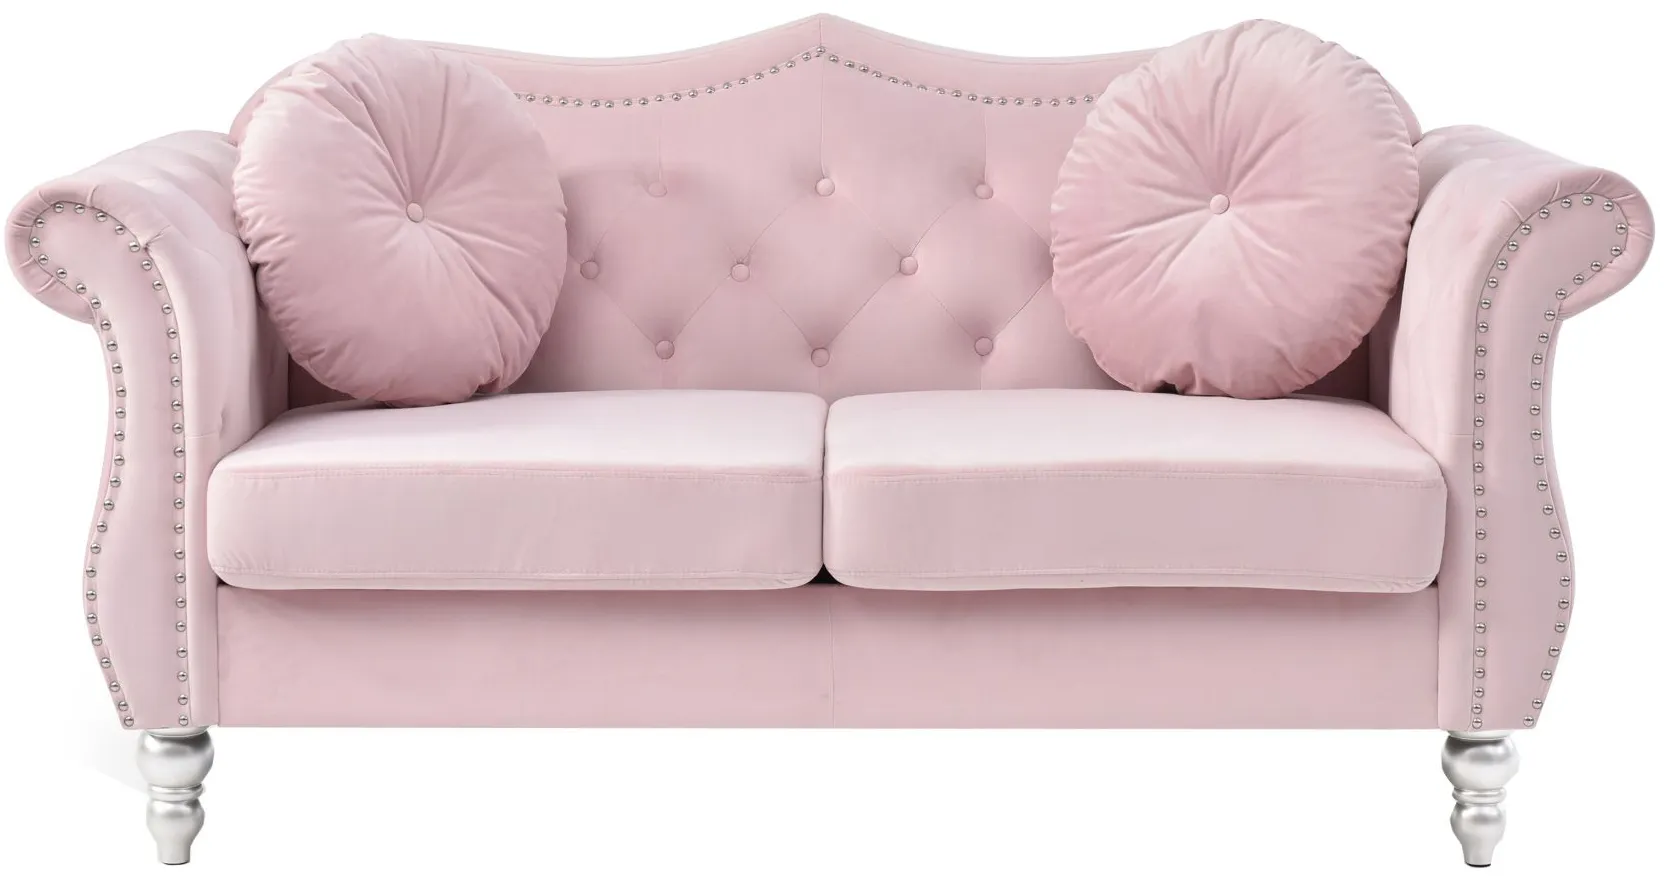 Hollywood Loveseat in Pink by Glory Furniture